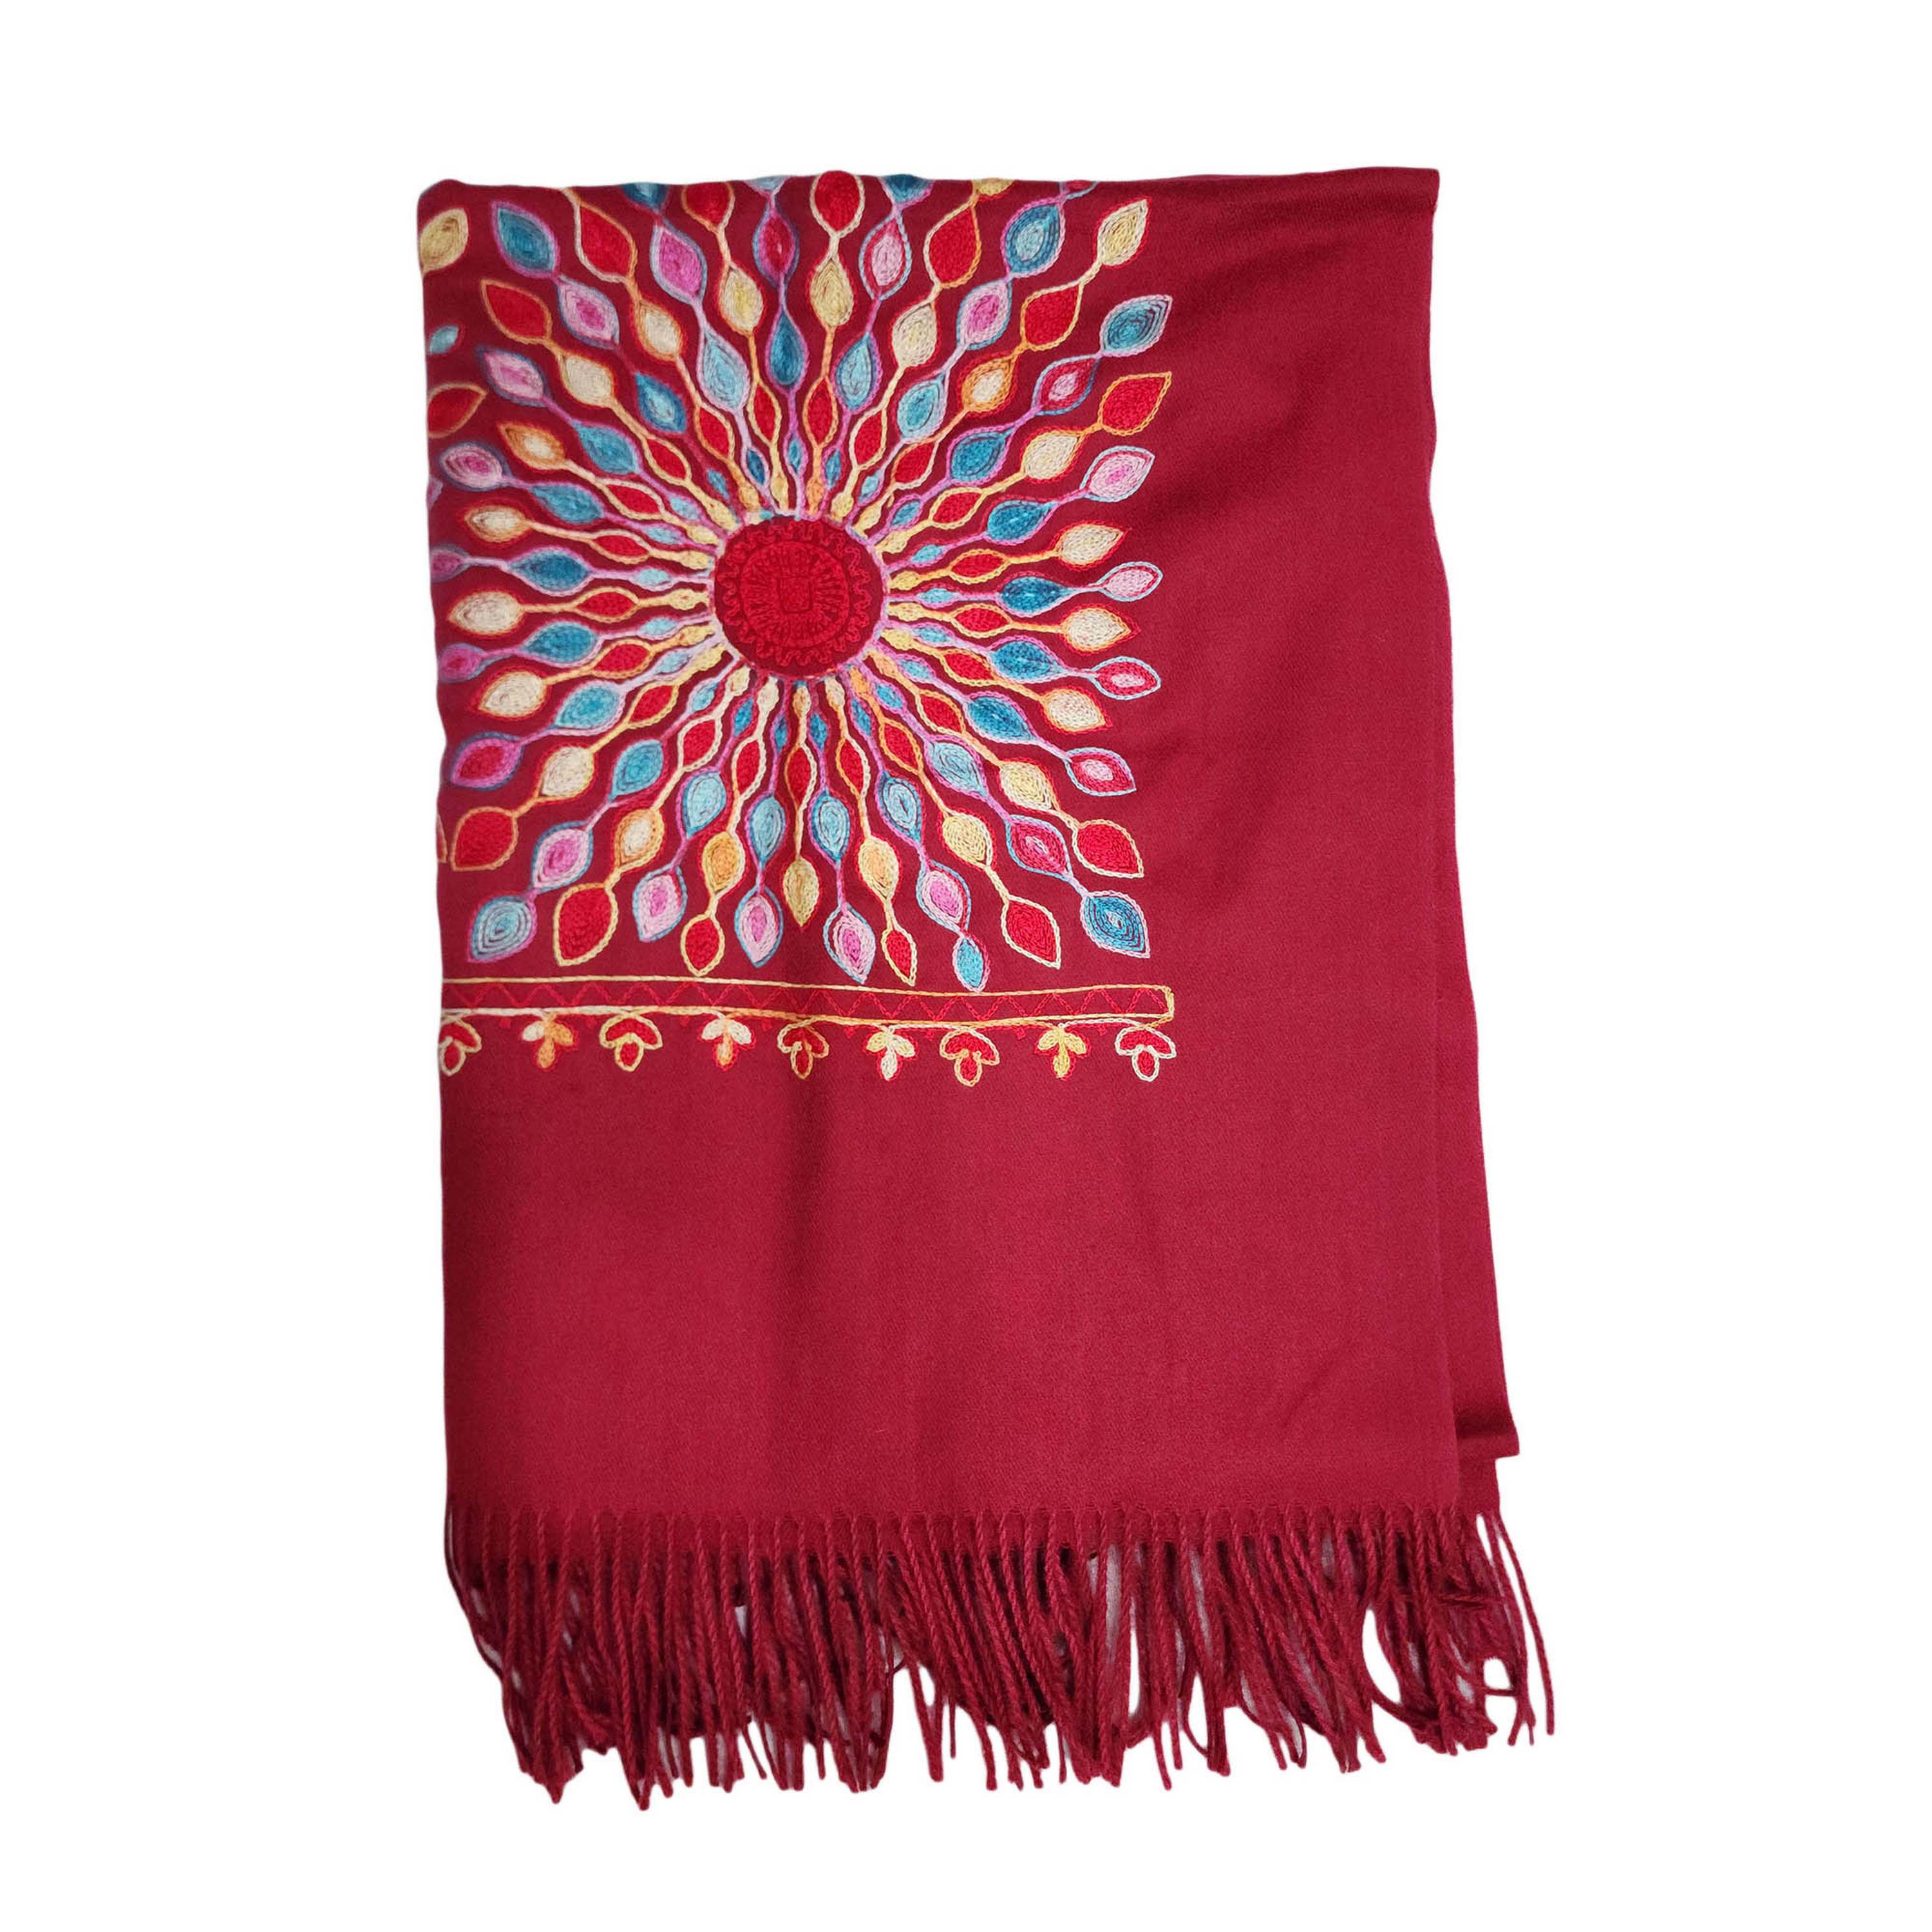 Desigener Shawl, Thick Nepali Shawl, With Heavy Embroidery, Color red